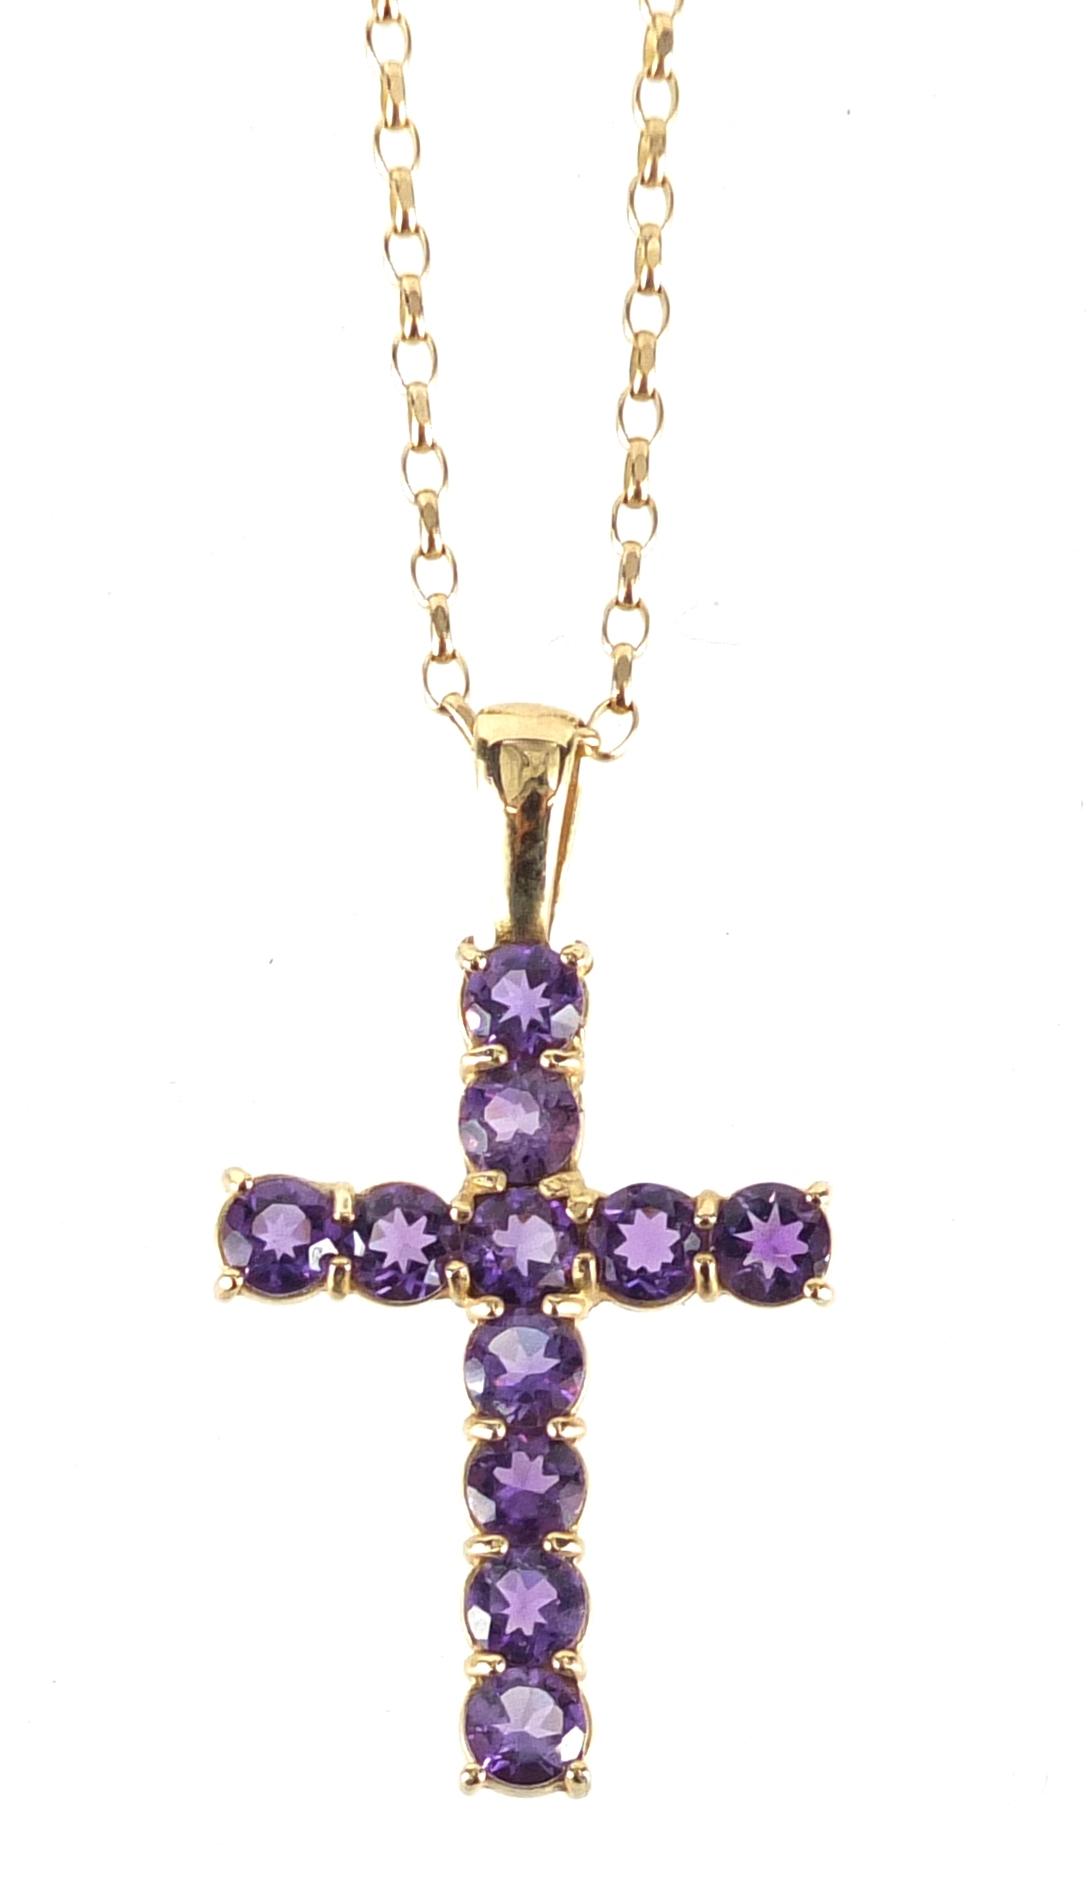 9ct gold amethyst cross pendant on a 9ct gold necklace, the pendant 3.6cm in length, approximate